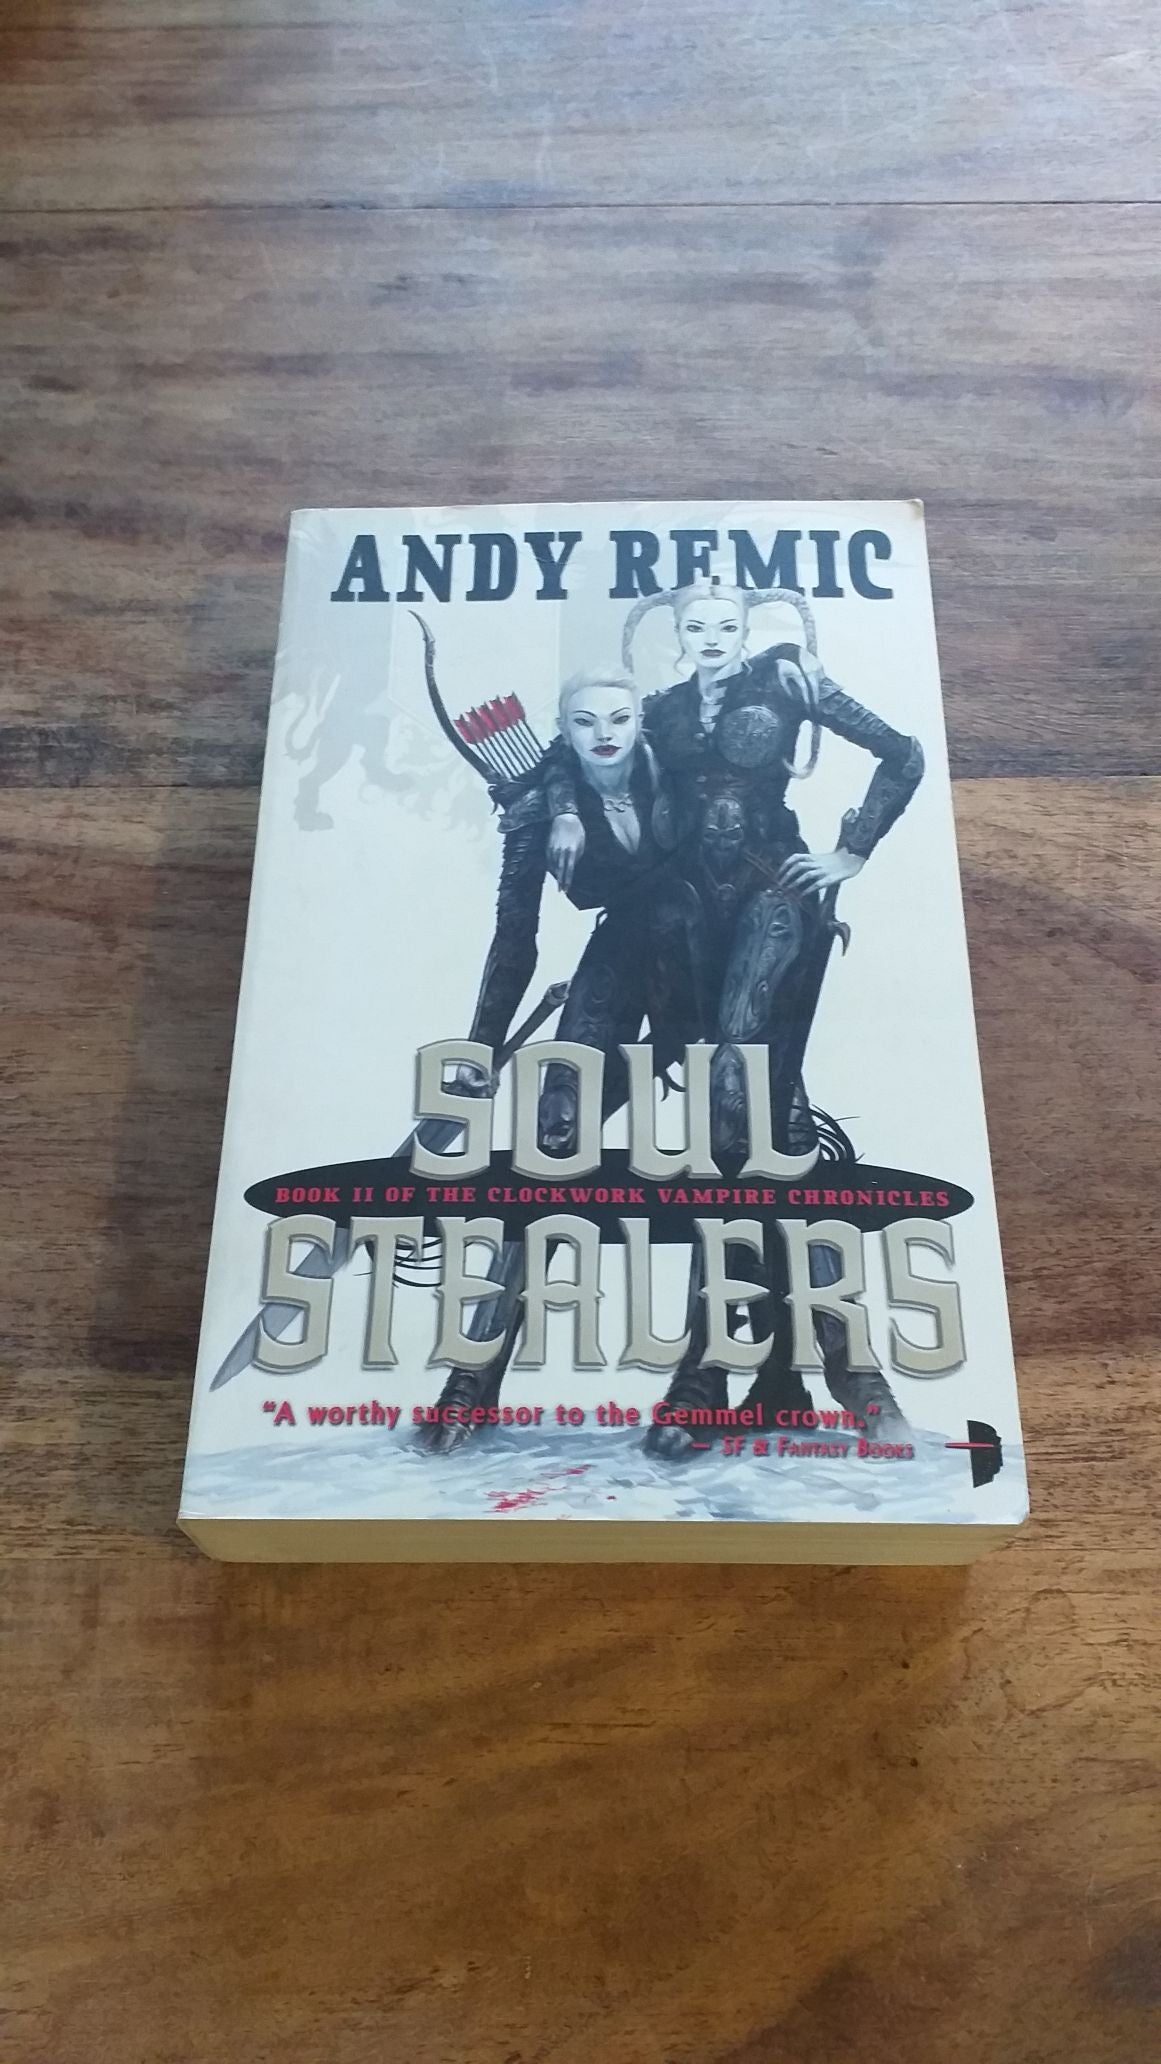 Soul Stealers The Clockwork Vampire Chronicles Book 2 by Andy Remic 2010